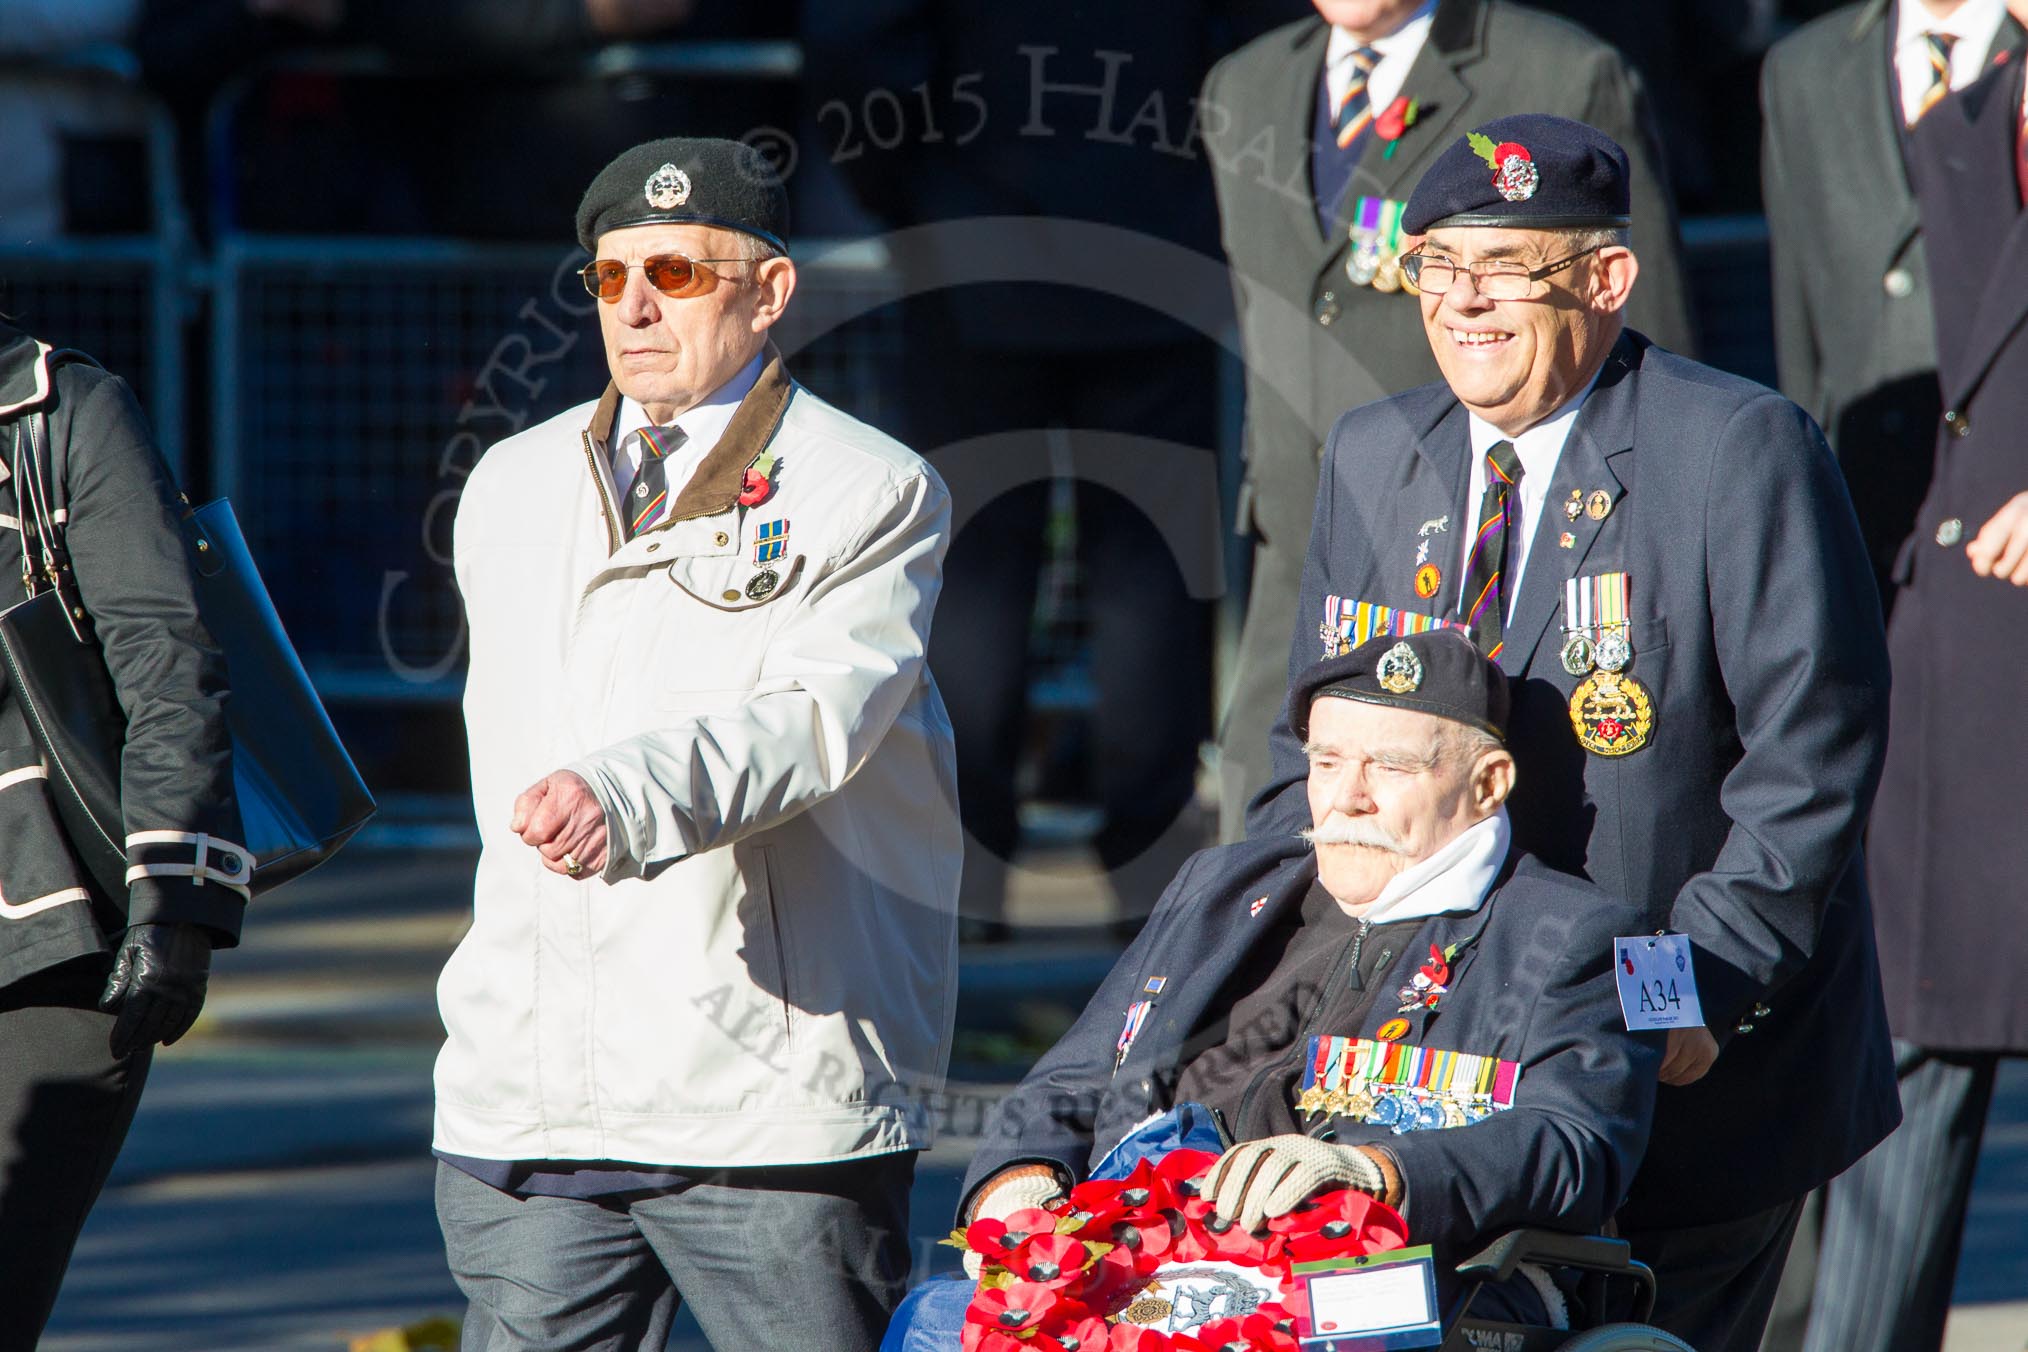 Remembrance Sunday Cenotaph March Past 2013: A34 -Royal Hampshire Regiment Comrades Association..
Press stand opposite the Foreign Office building, Whitehall, London SW1,
London,
Greater London,
United Kingdom,
on 10 November 2013 at 11:58, image #1300